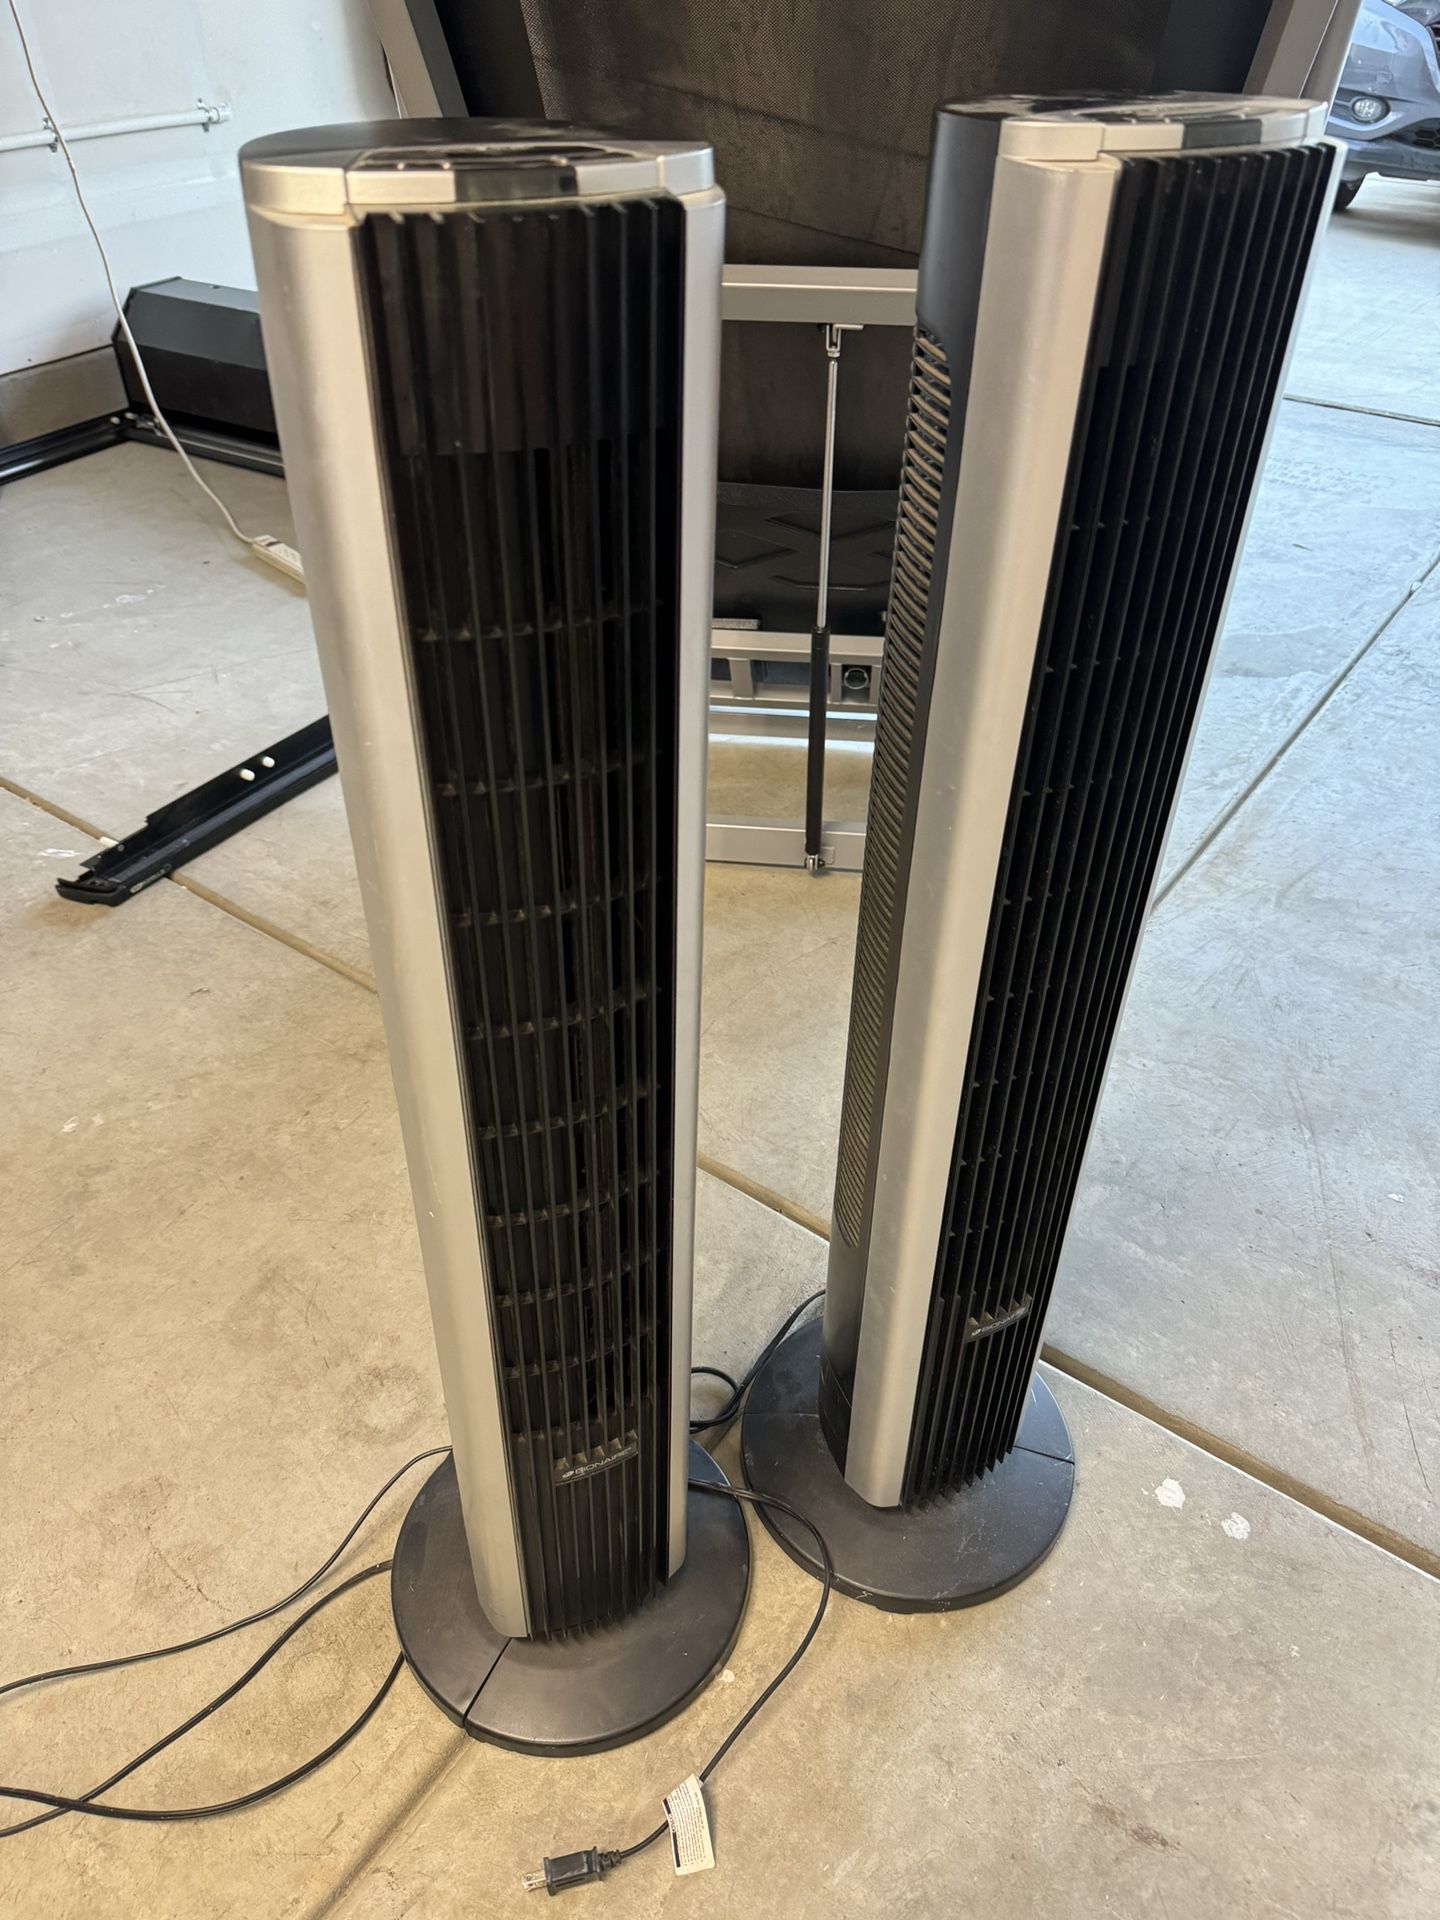 2 Tower Fans For Sale